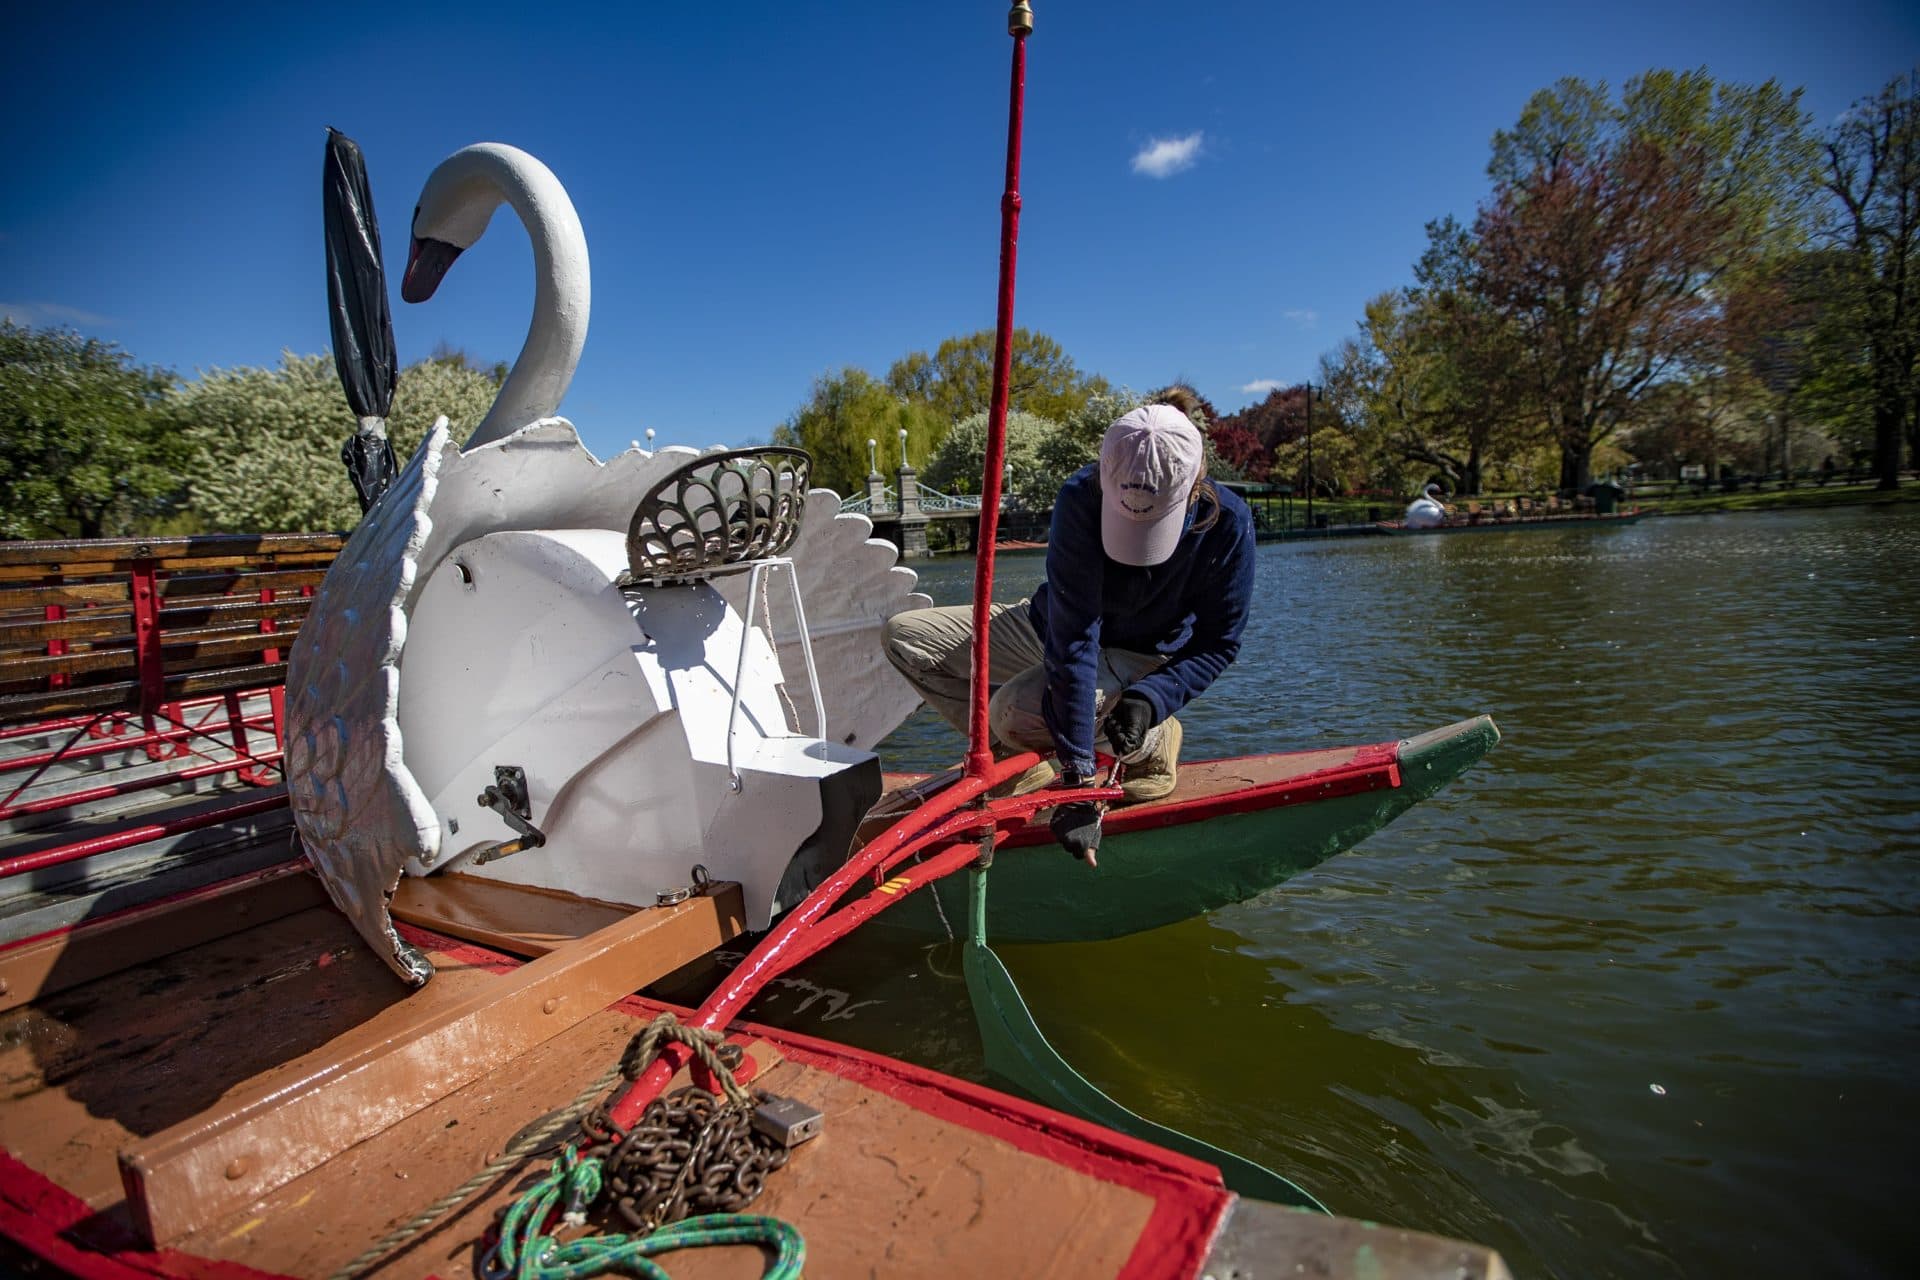 Lyn Paget, president of Swan Boats Inc., connects the swan boat's rudder to the steering system. (Jesse Costa/WBUR)